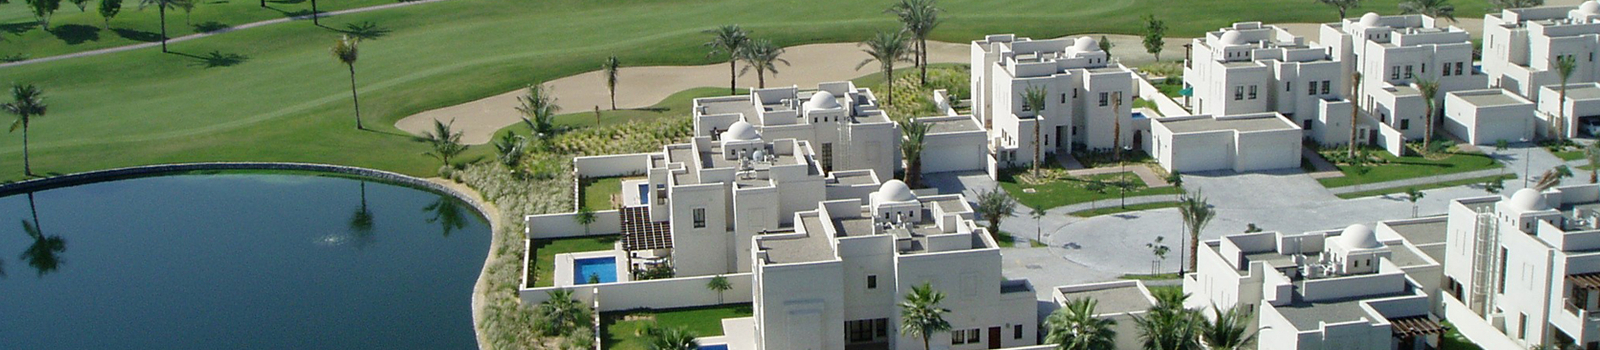 <strong>Our service is our key differentiator</strong><br/><br/><span>Villas at Dubai Creek Golf & Yacht Club – Dubai</span> 